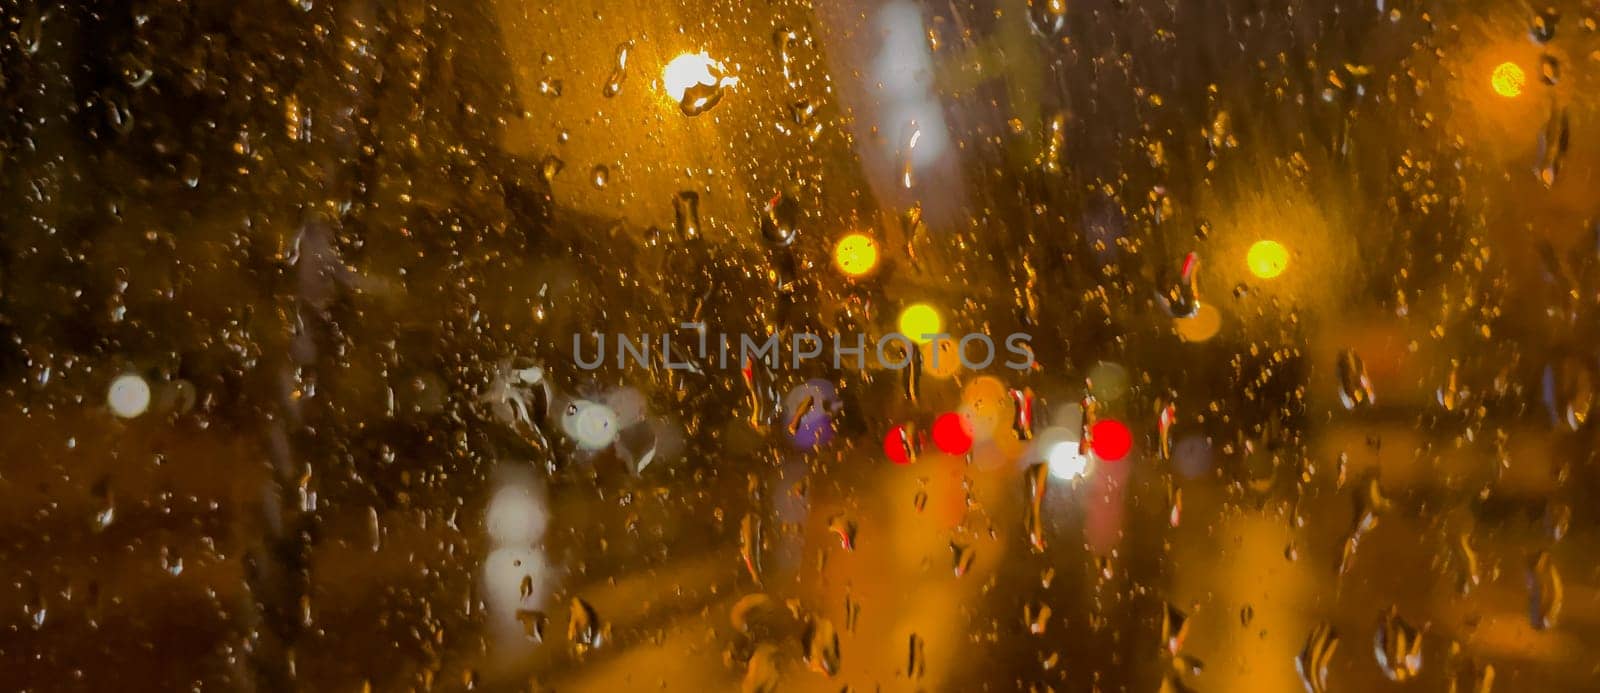 Rain bokeh road lights. Abstract shot of evening city traffic bokeh. Multicolored lights of the evening city and passing cars through a wet rainy window